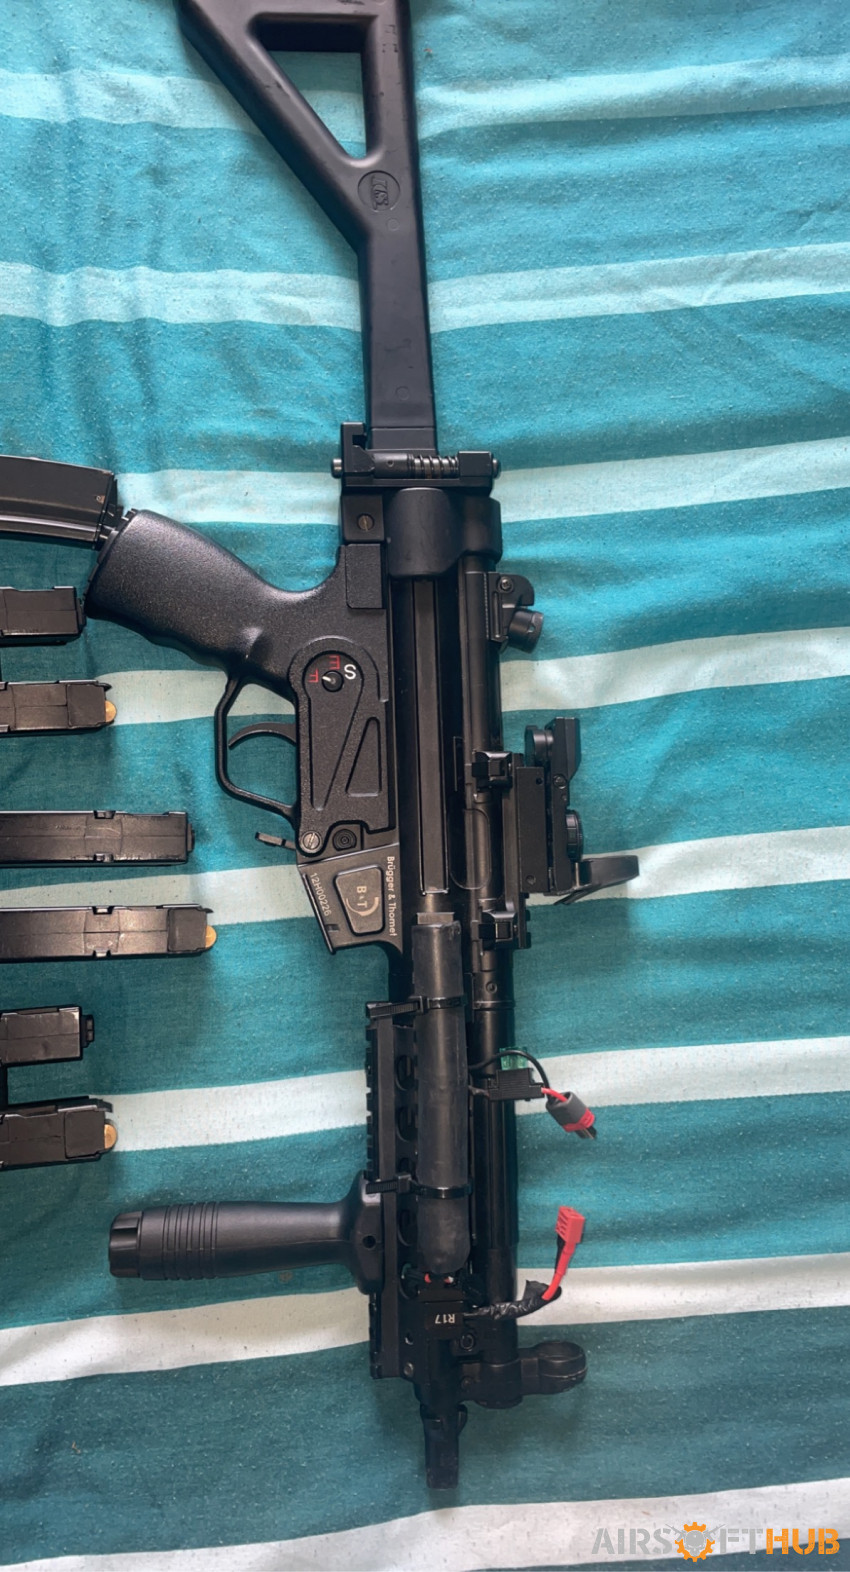 ICS Mp5 good working order - Used airsoft equipment